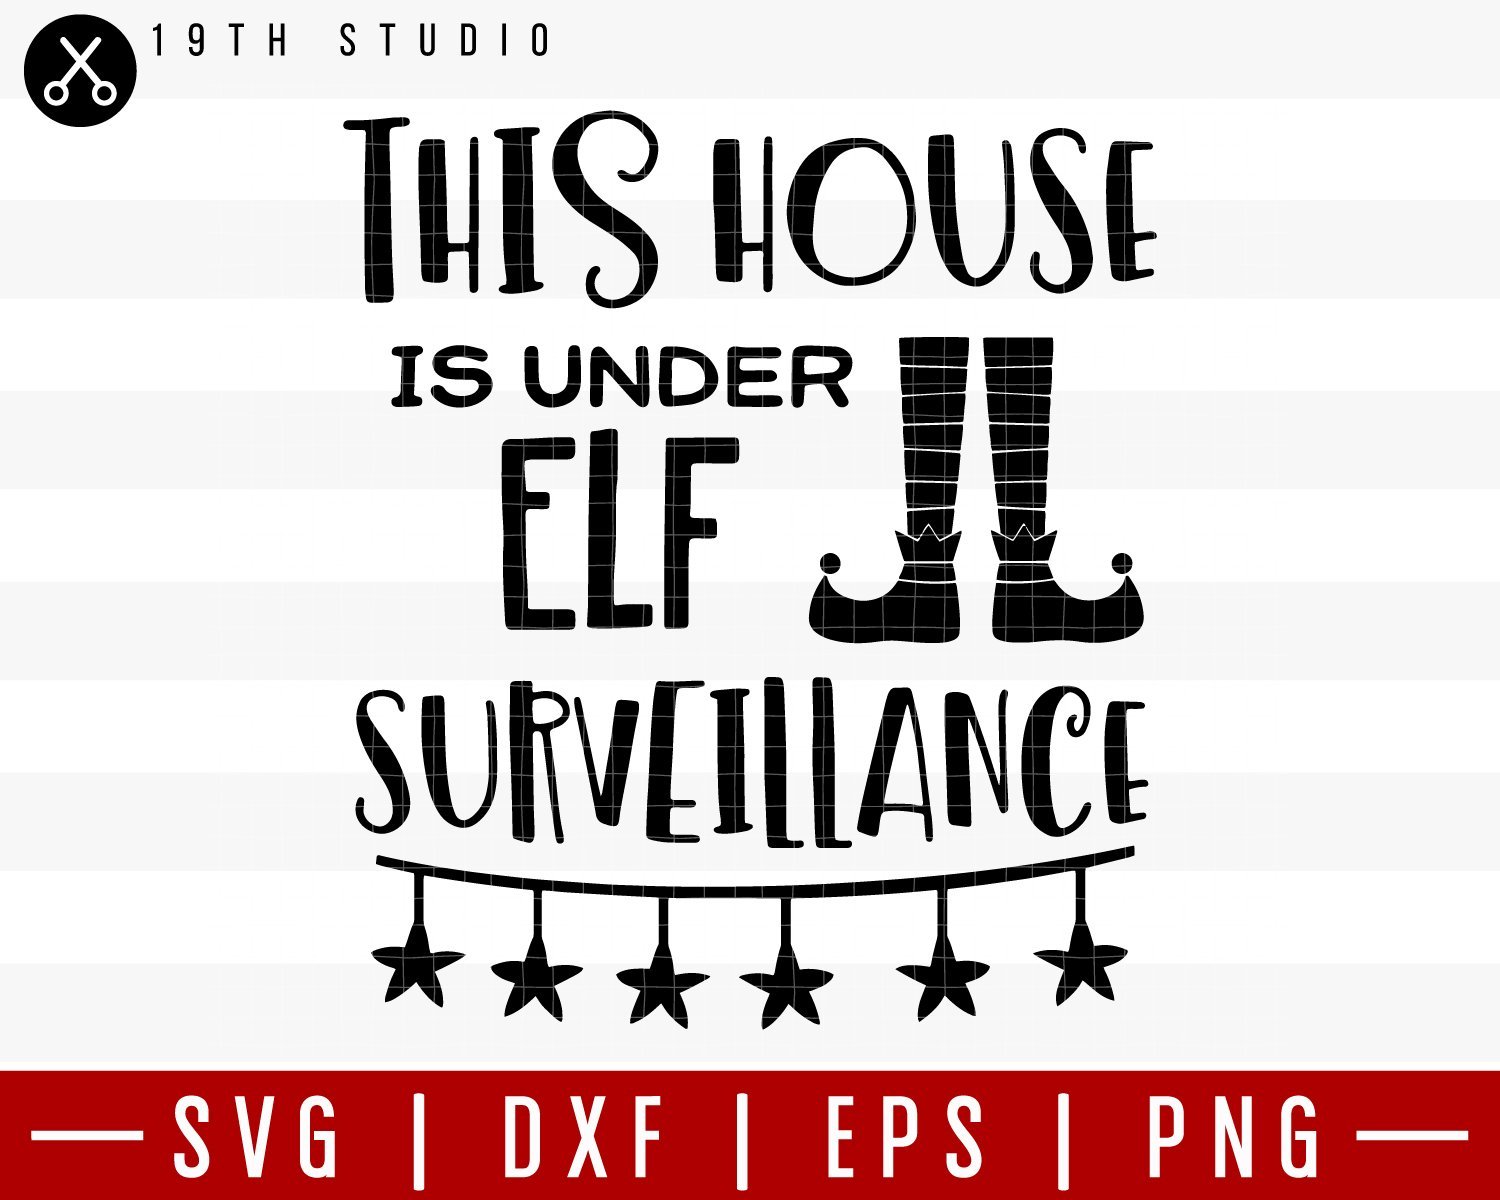 This house is under elf surveillance SVG | M36F14 Craft House SVG - SVG files for Cricut and Silhouette